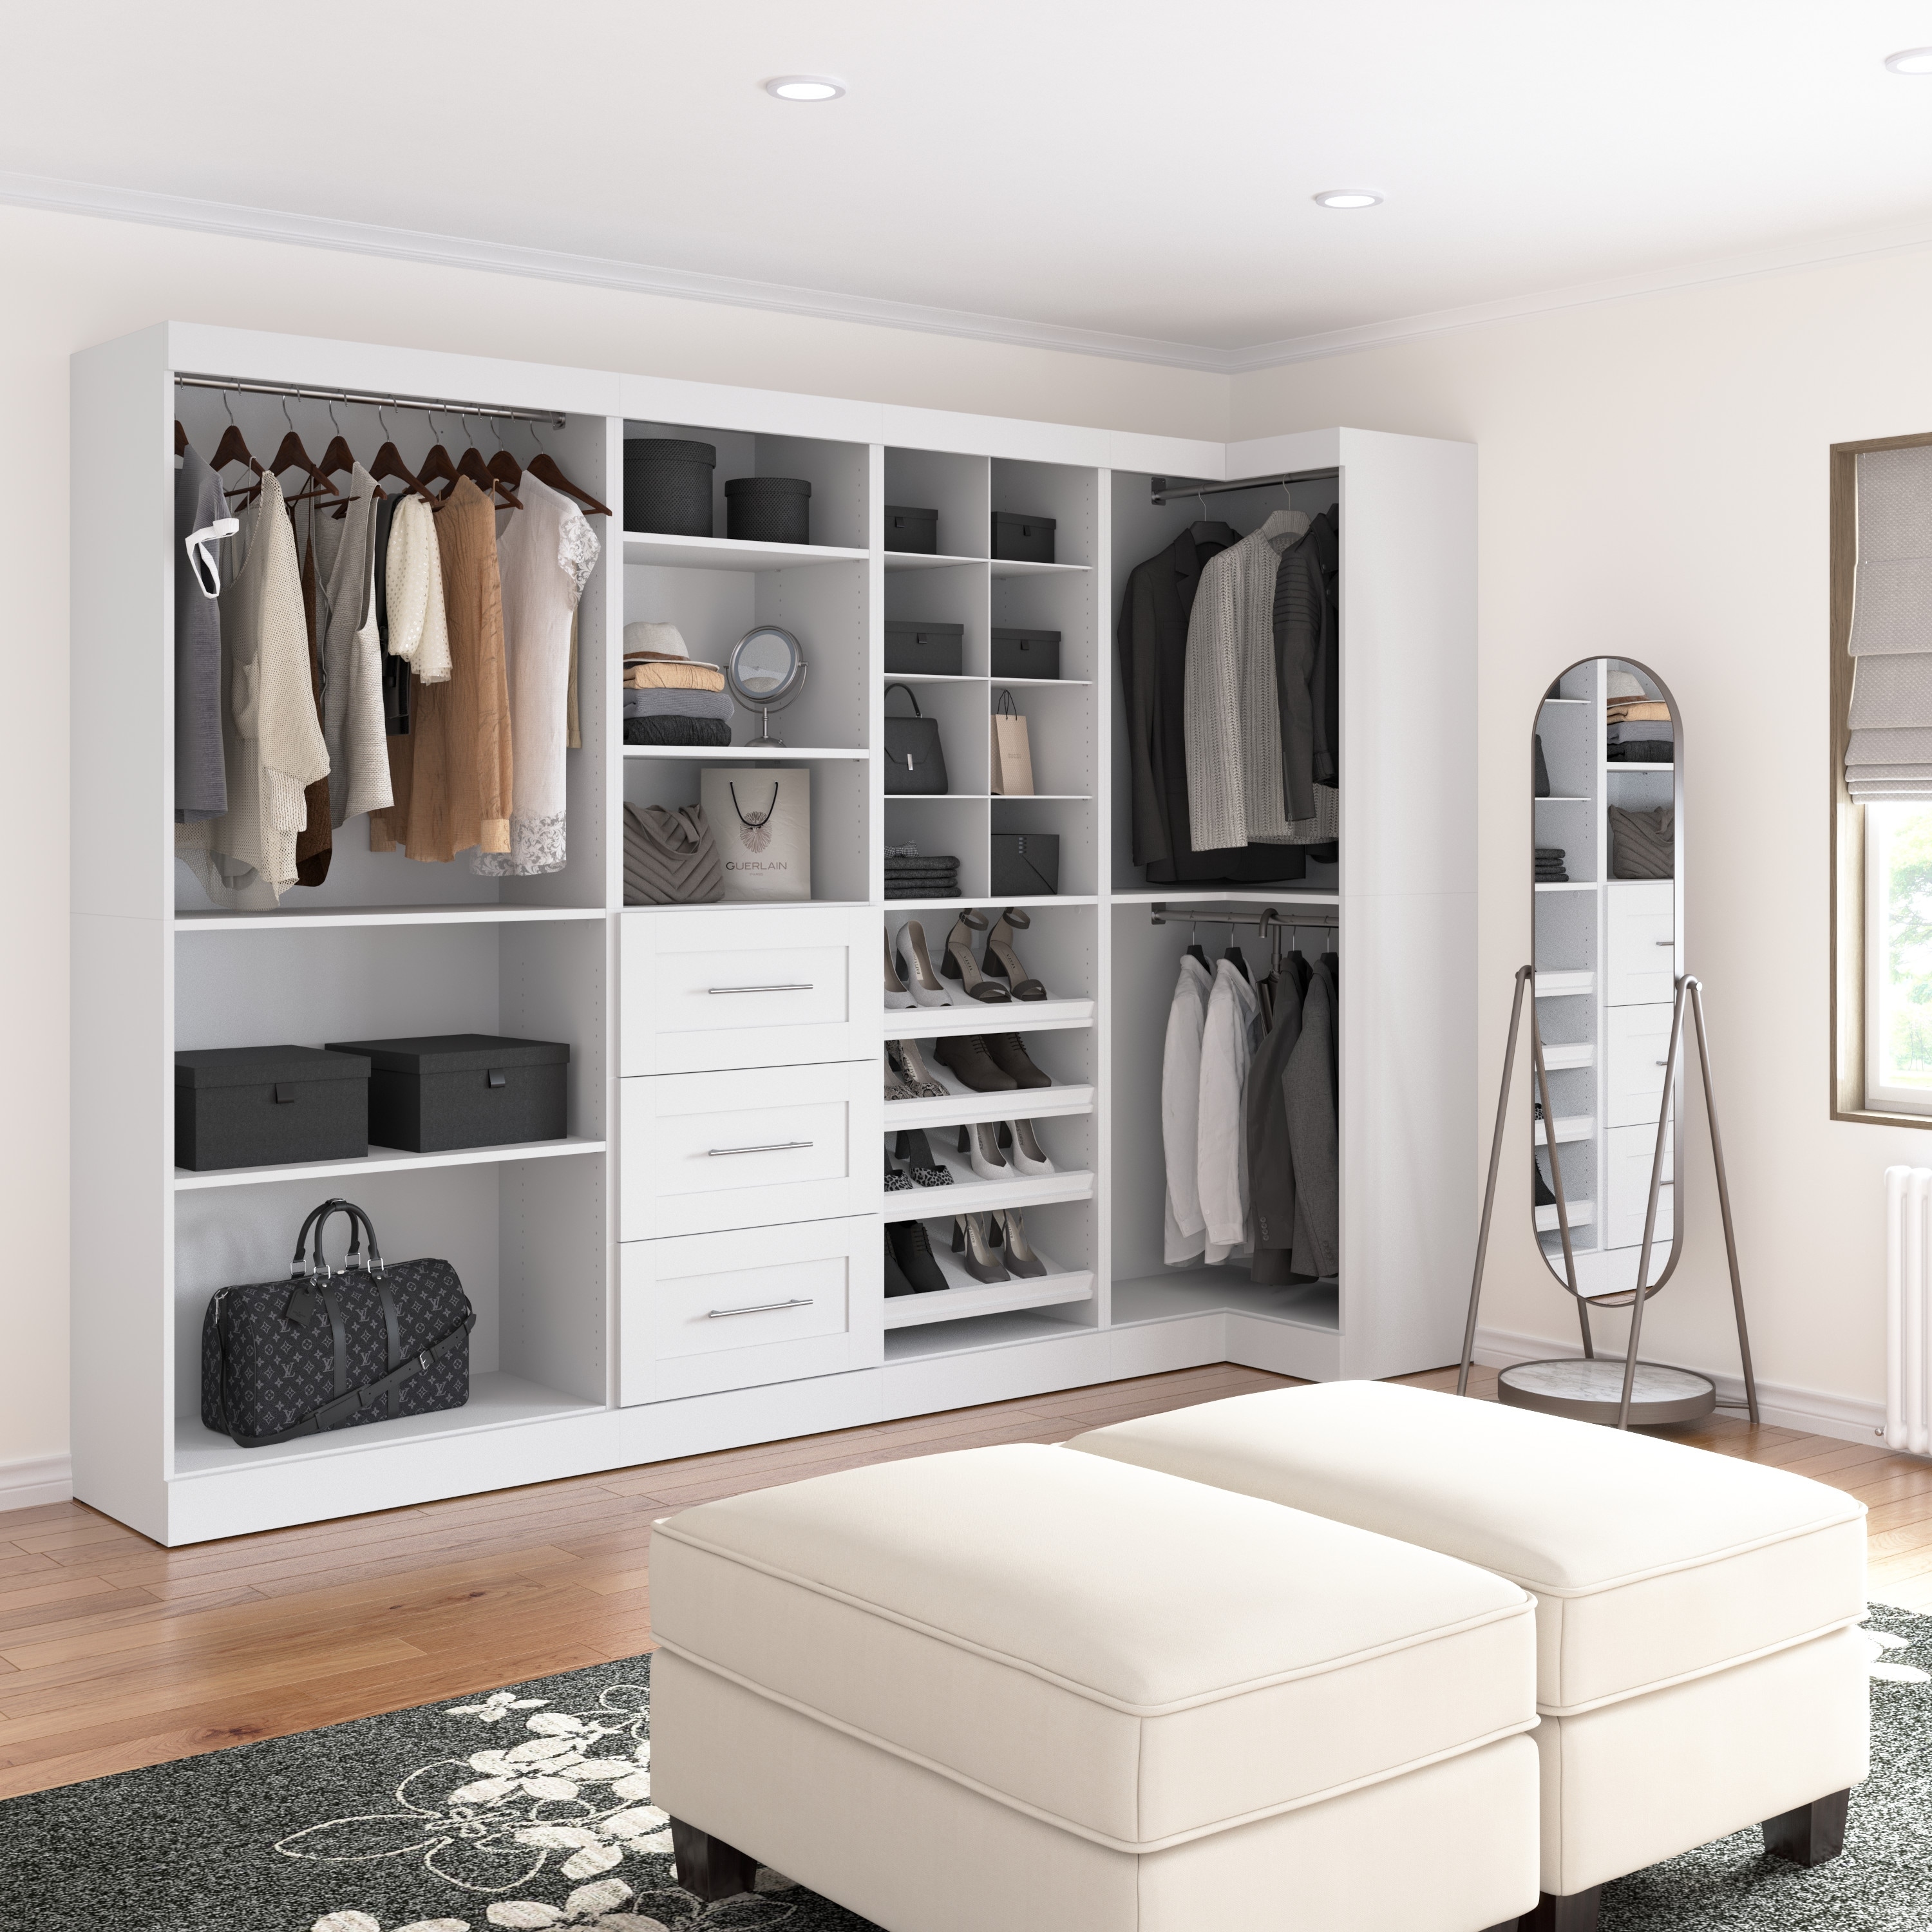 https://ak1.ostkcdn.com/images/products/is/images/direct/acdd66c8774854f27115b9f6d5da96bc3b8399da/Pur-83W-Walk-In-Closet-Organizer-by-Bestar.jpg